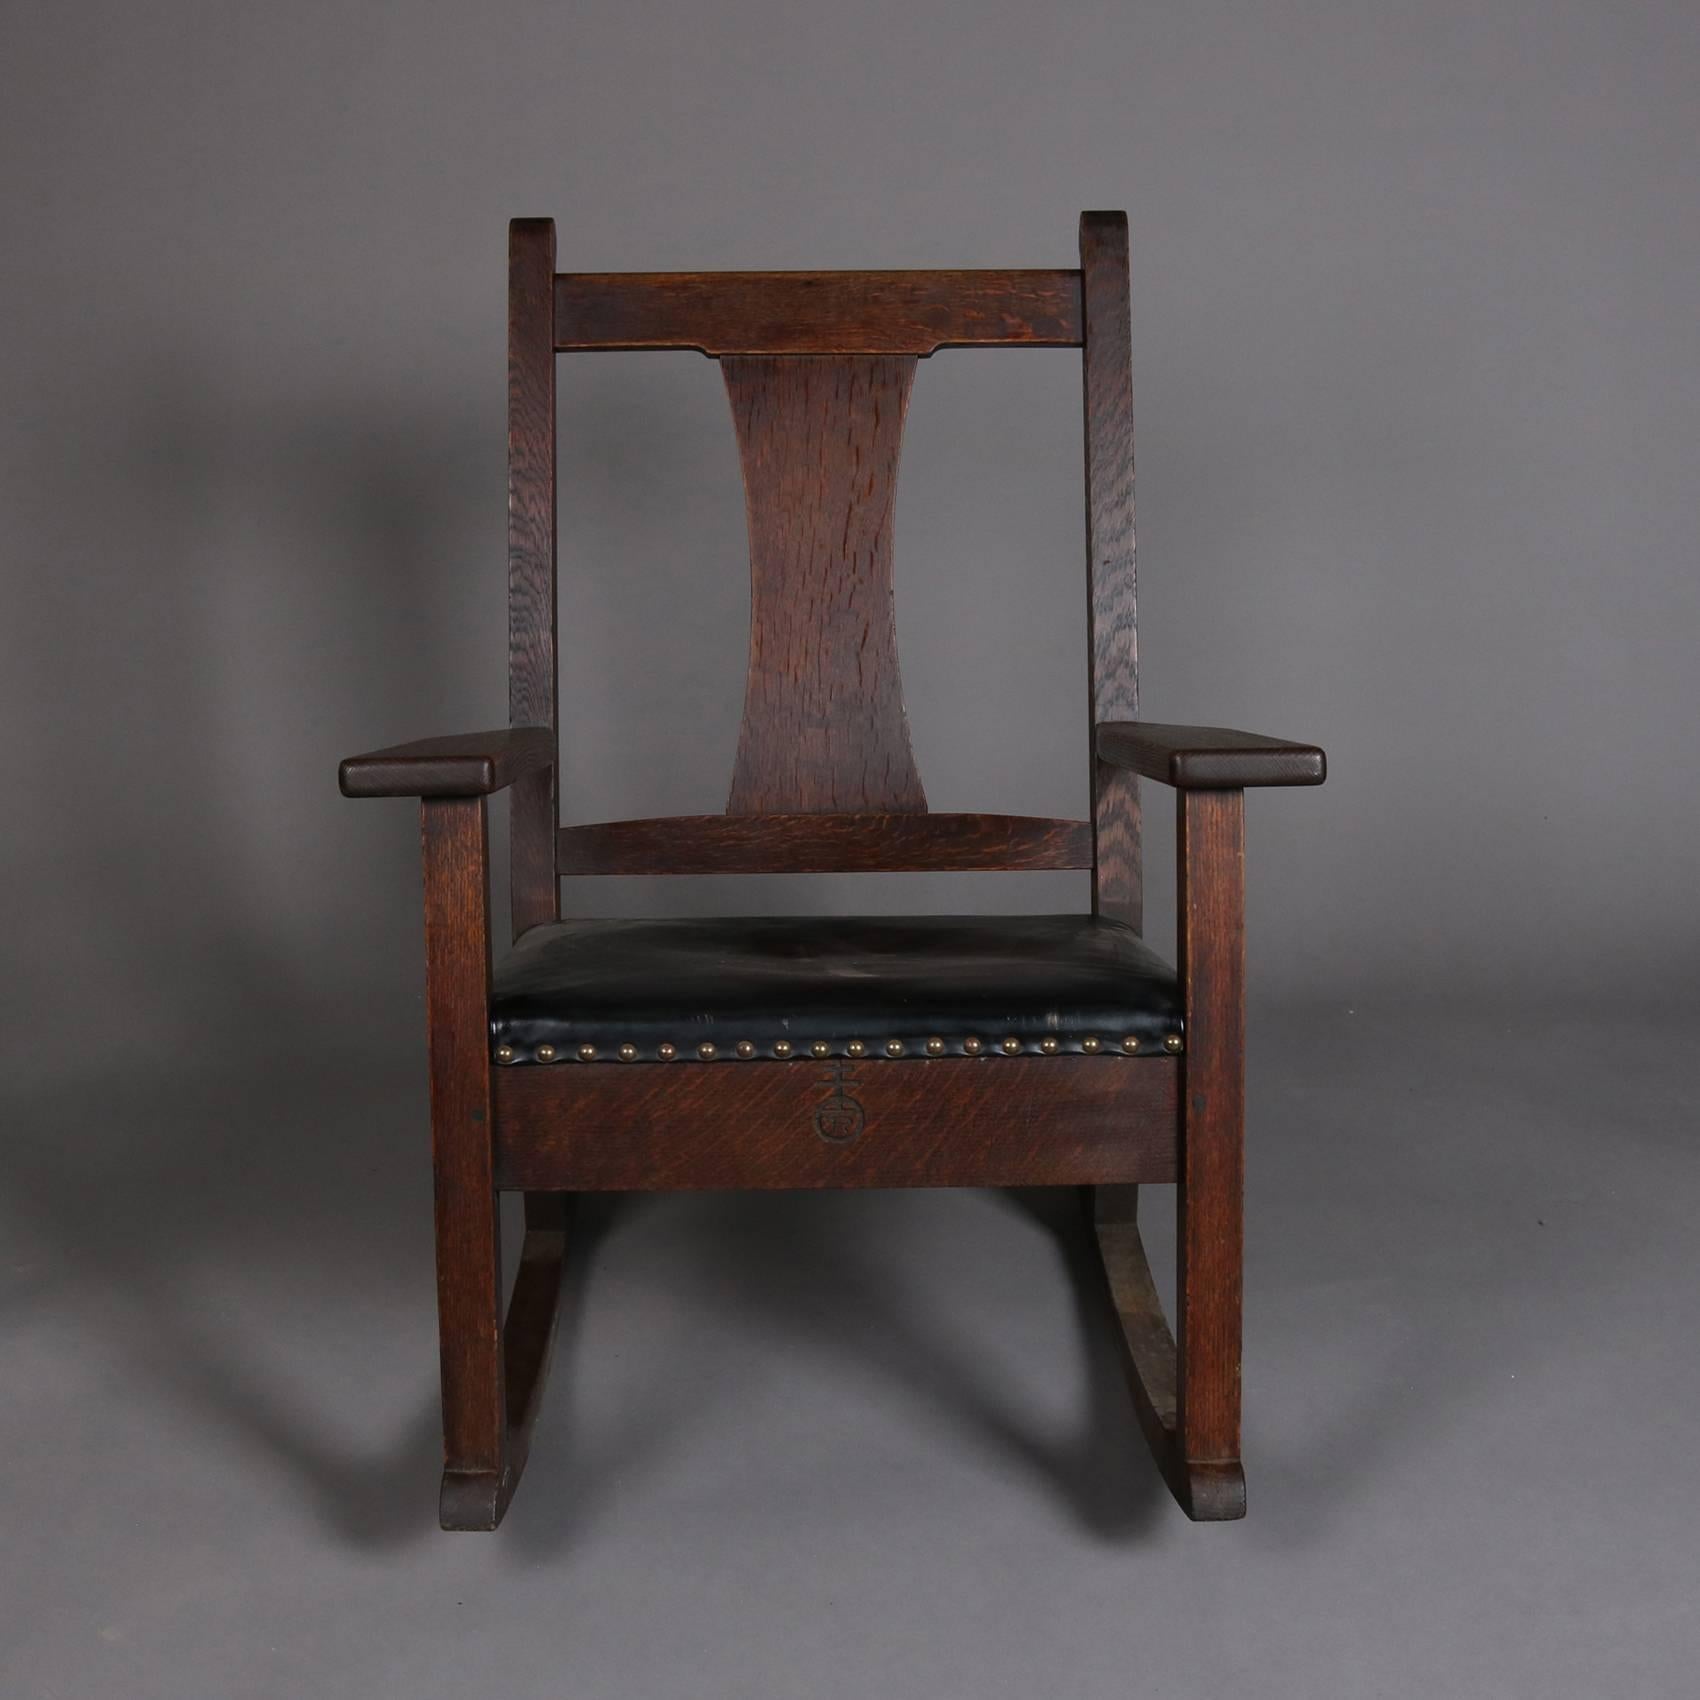 Antique Arts & Crafts mission oak rocker by Roycroft features slat back and upholstered seat, signed with Roycroft brand on back as photographed, early 20th century

Measures: 35" H x 27" W x 32" D, 15" seat height.